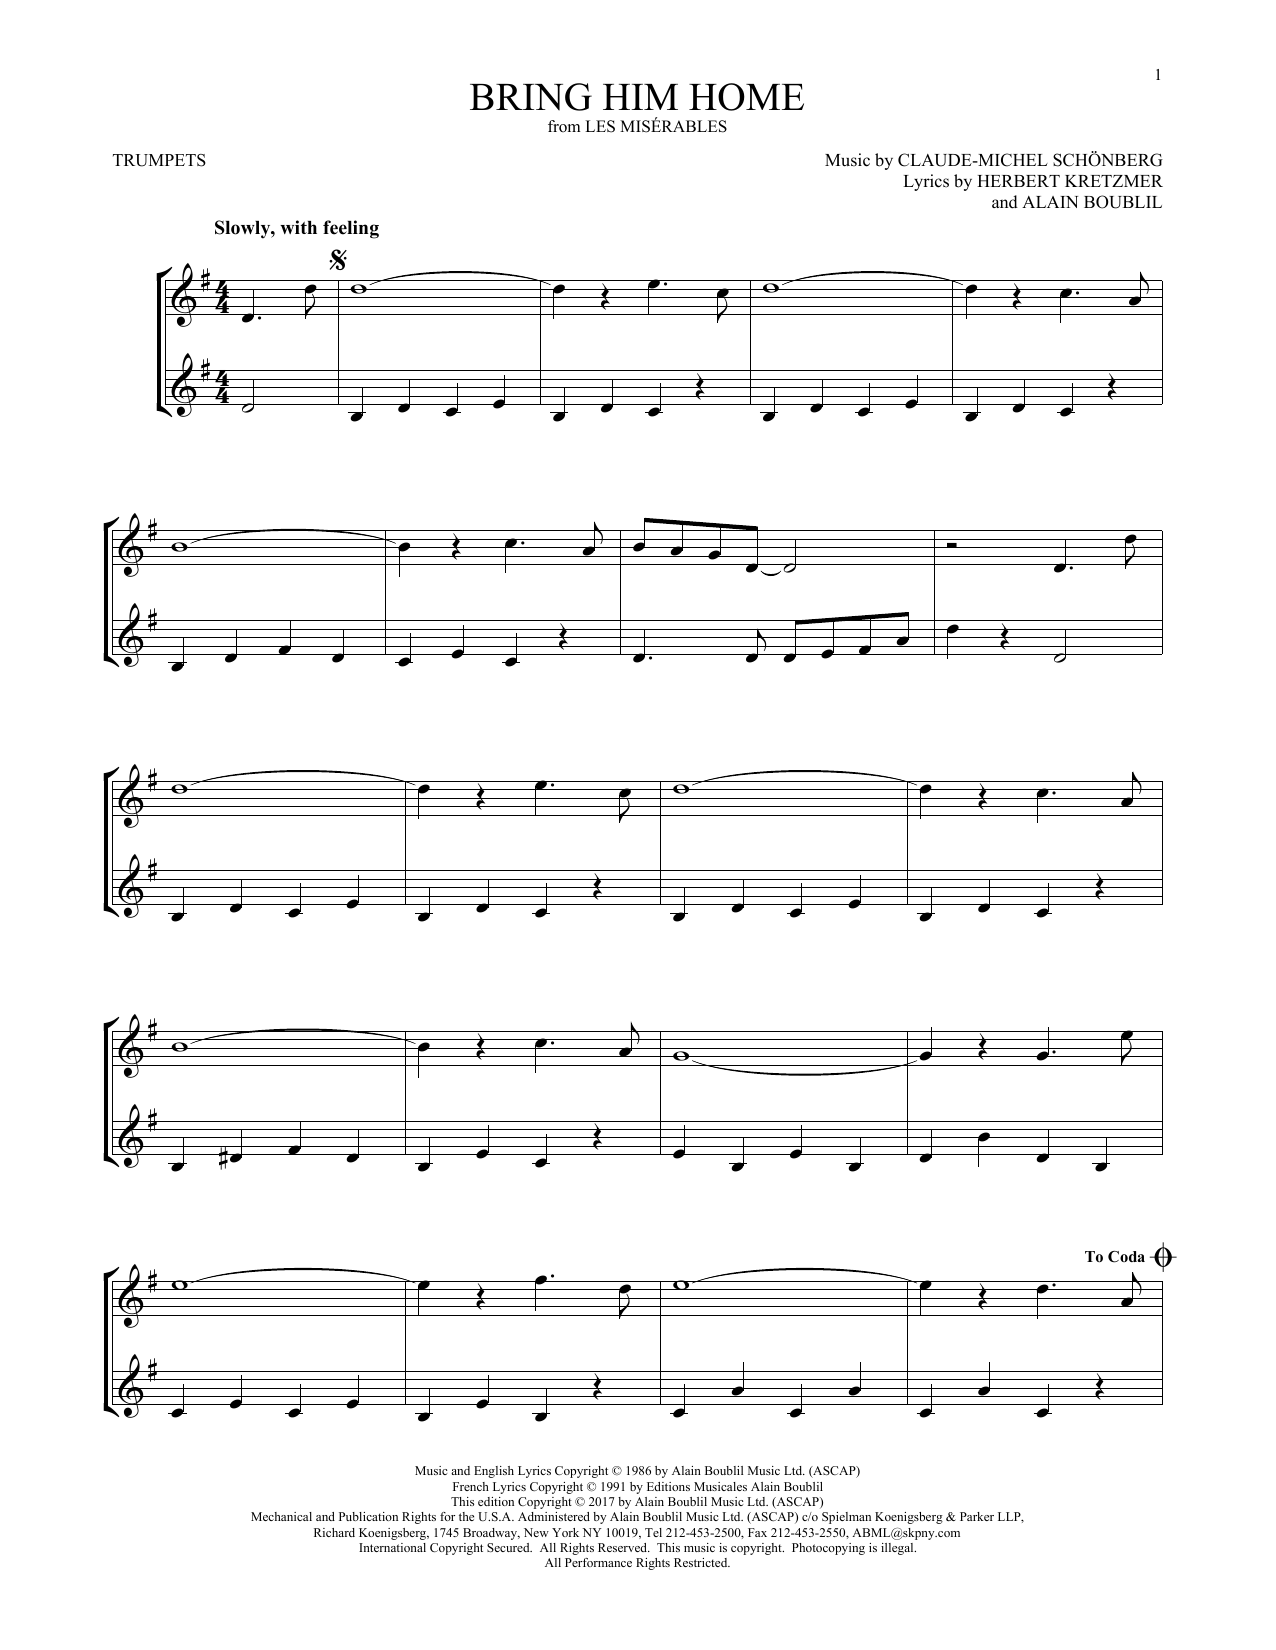 Claude-Michel Schonberg Bring Him Home sheet music notes and chords. Download Printable PDF.